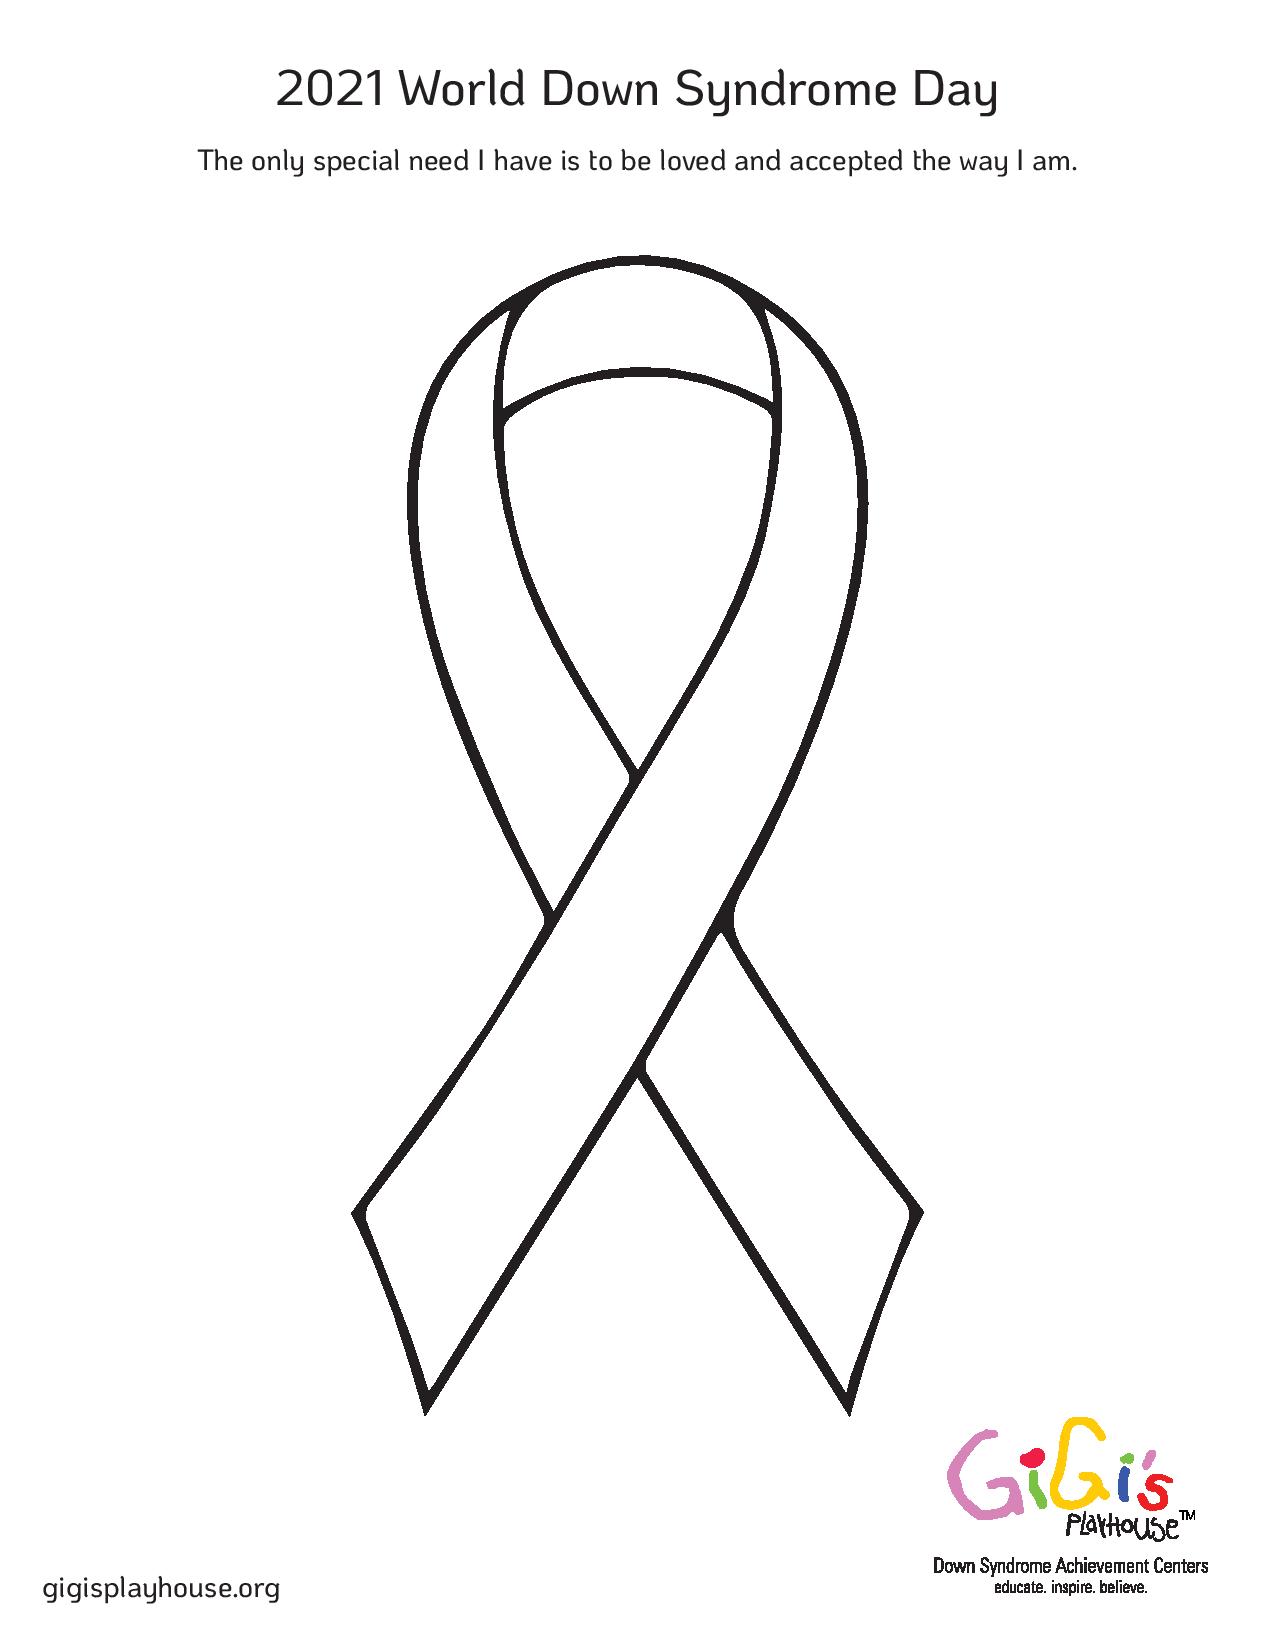 World Down Syndrome Day - Free Coloring Pages Here! - Little Rock